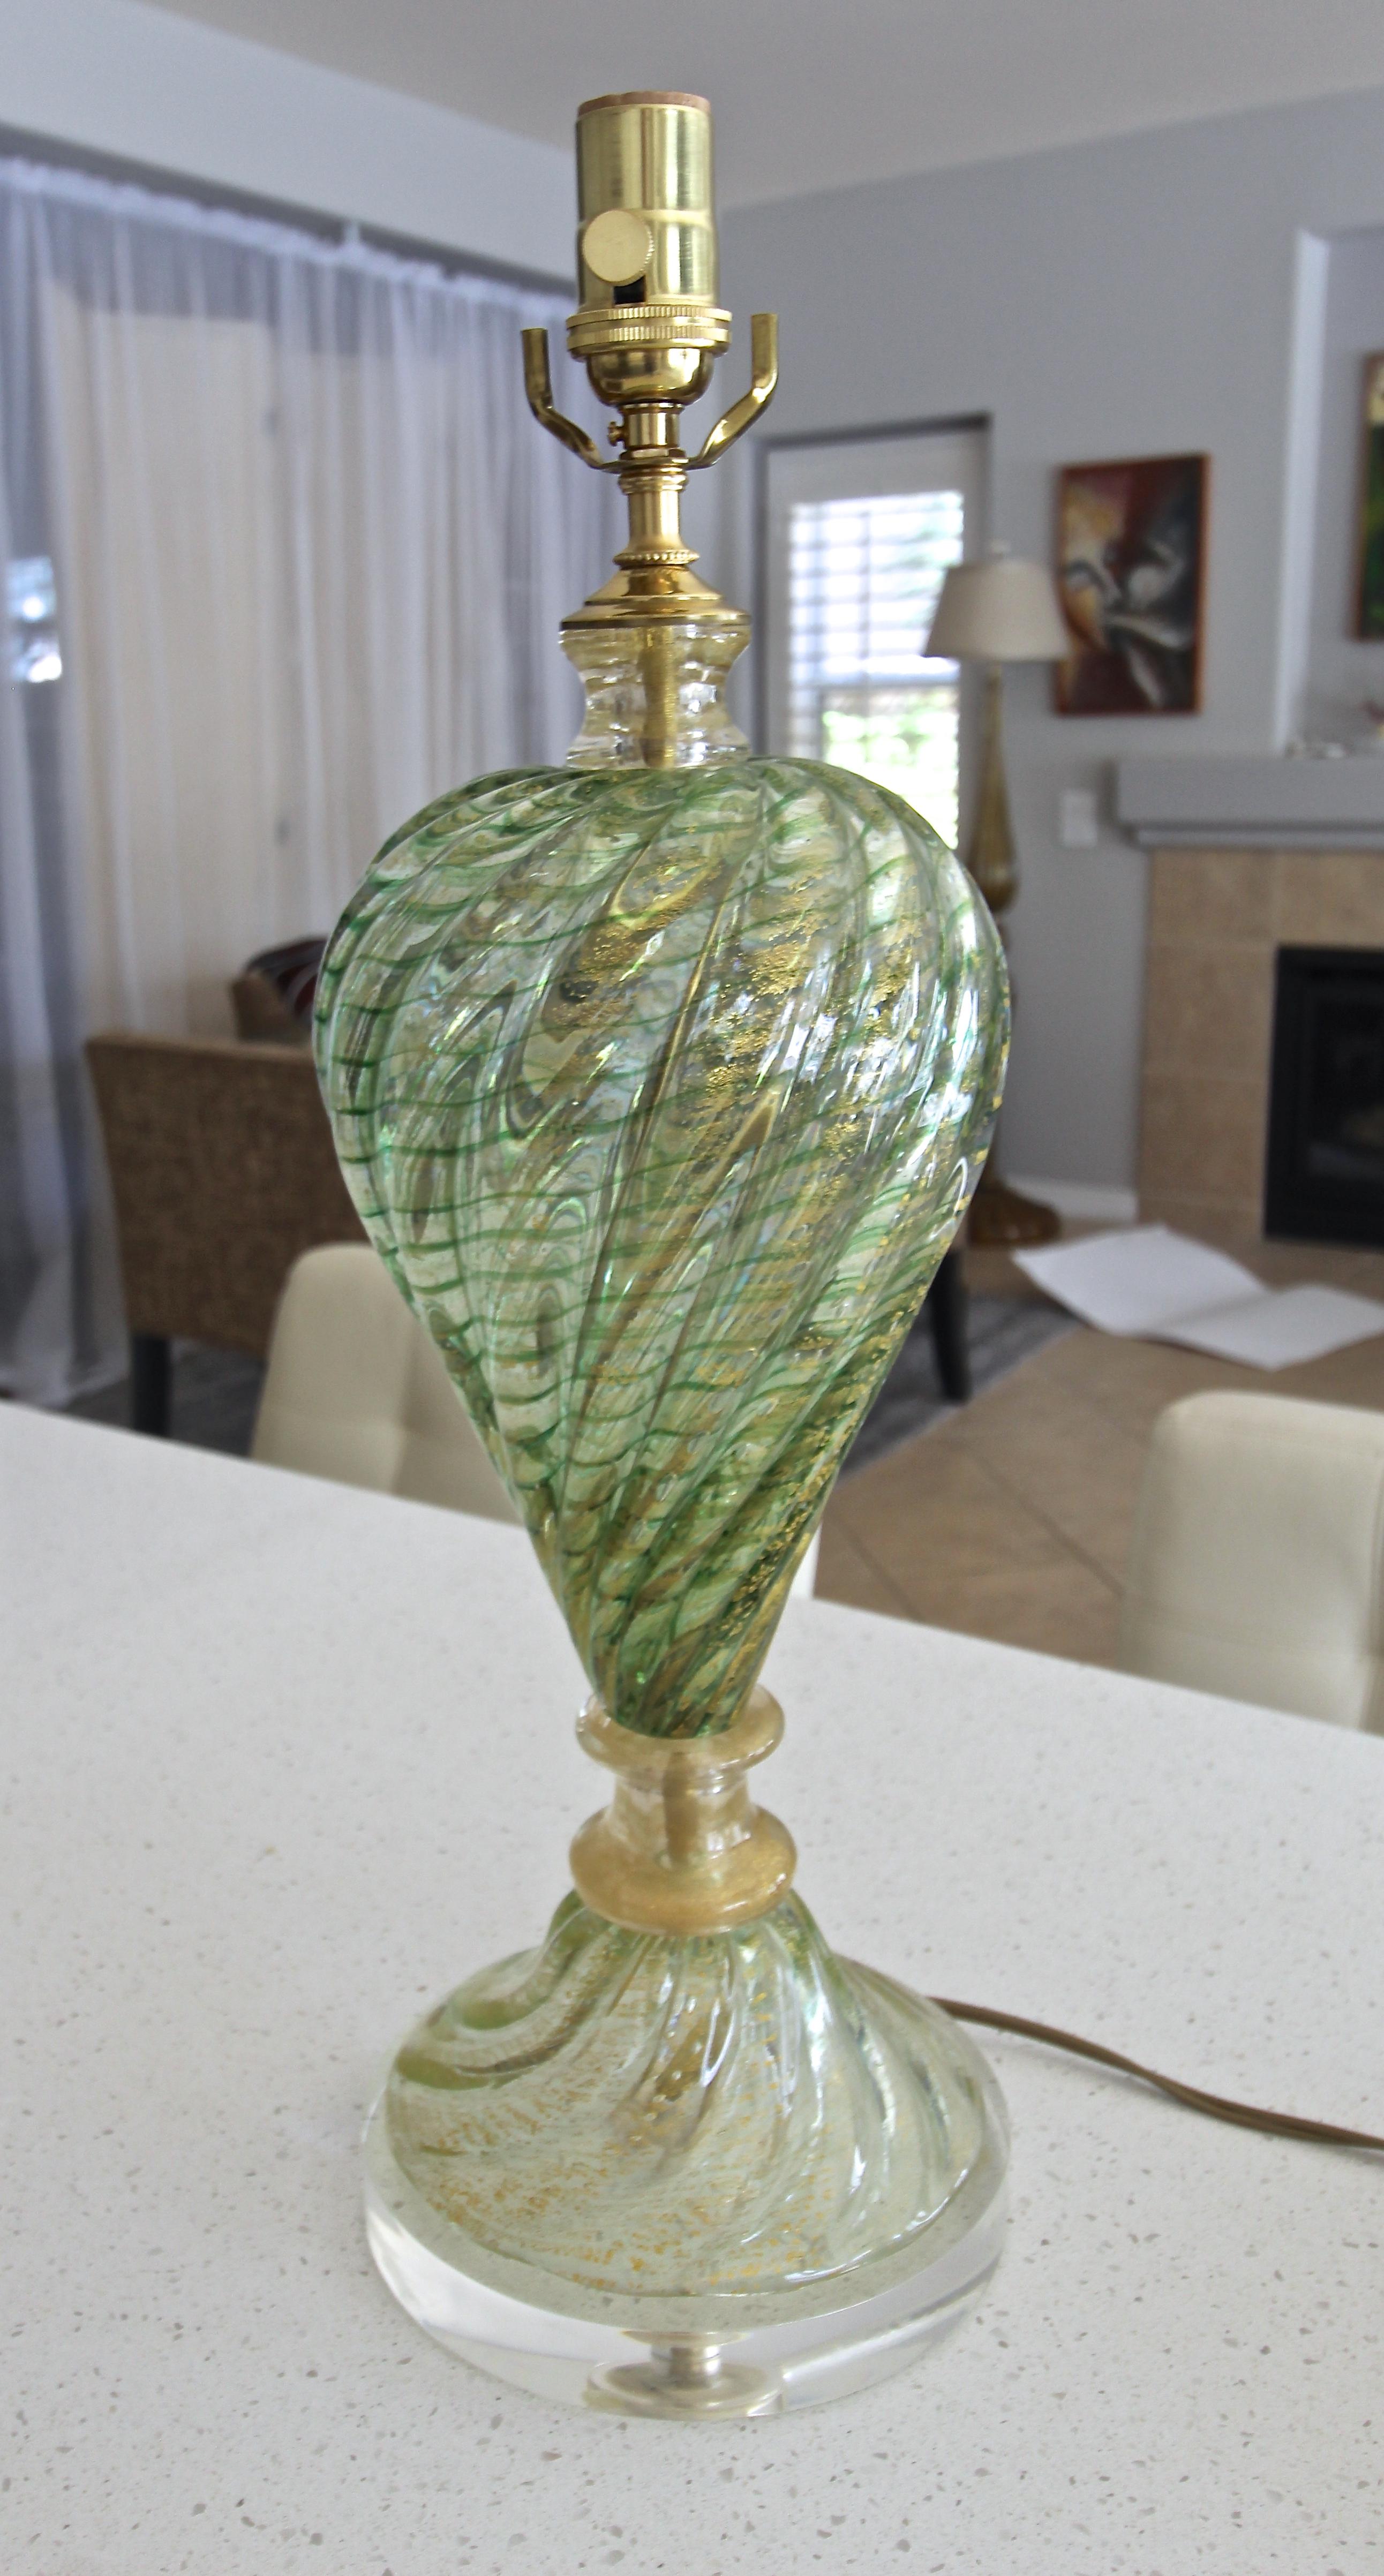 A single Italian Murano hand blown green glass with fine circular stripes and gold inclusions. Ribbed baluster form glass in 2 parts separated by 2 glass spacers. Newly wired with 3 way socket and cord, mounted on a new custom acrylic base.